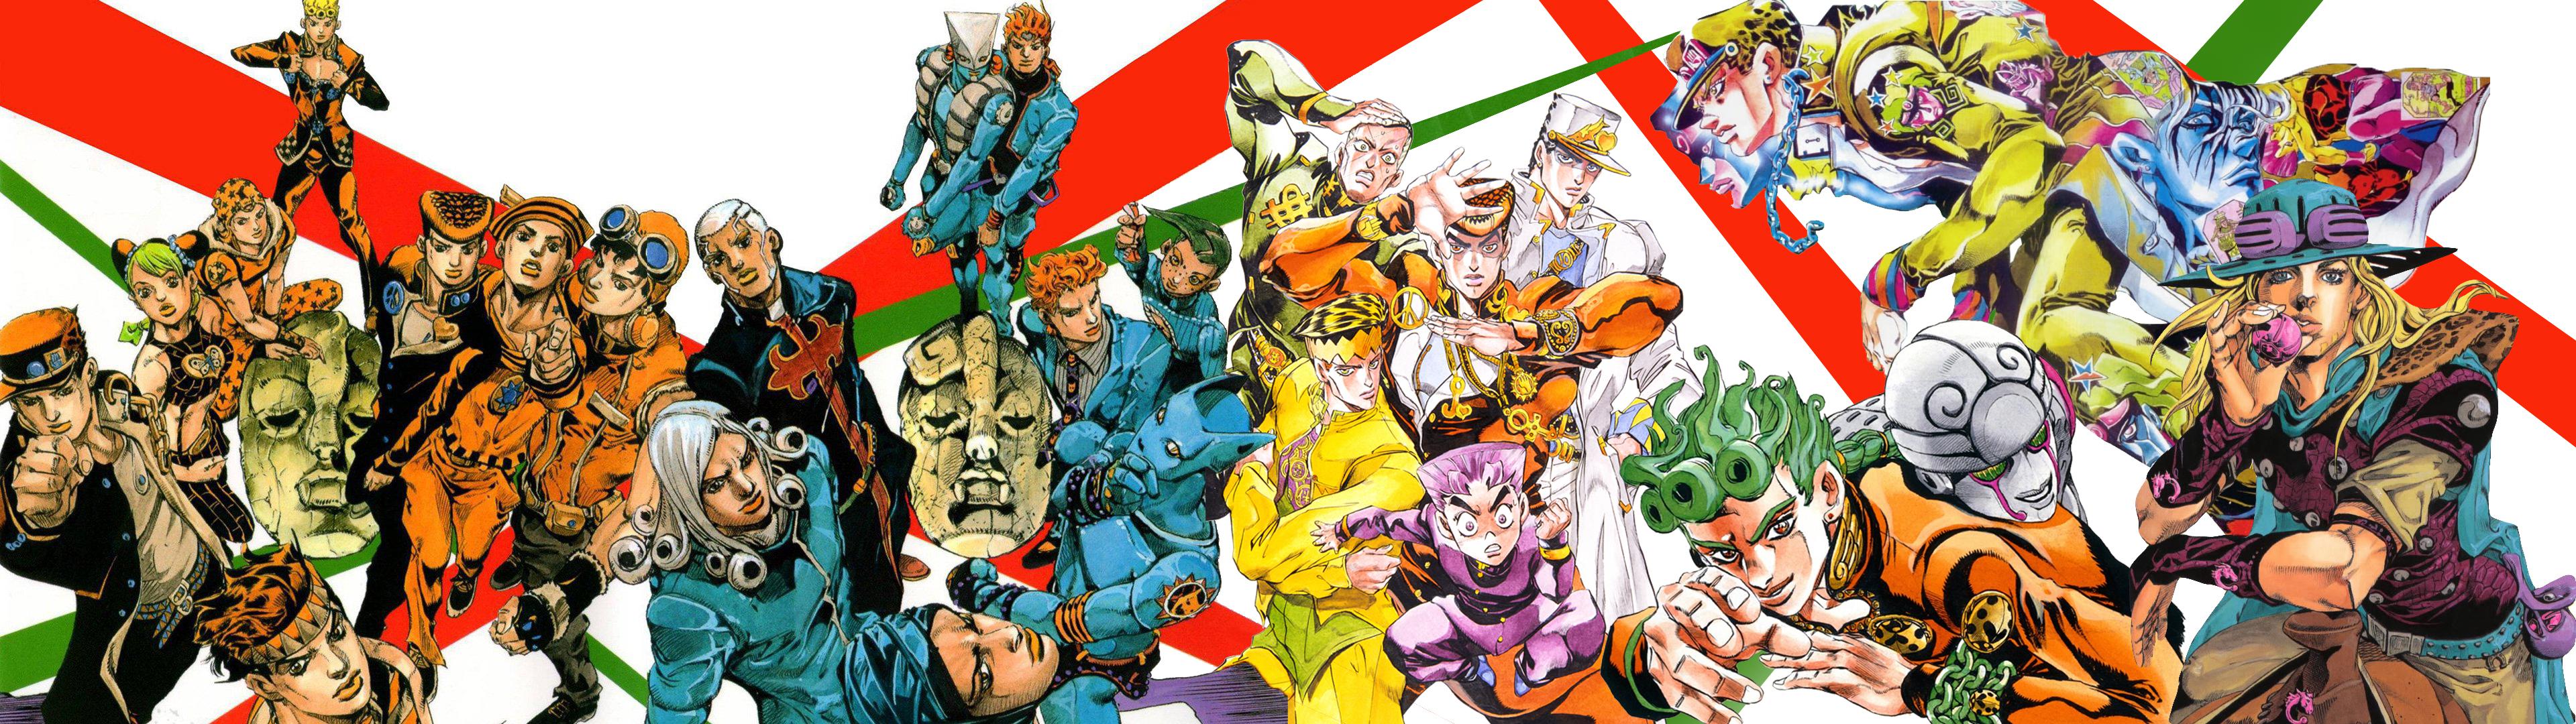 Stardust Crusaders Wallpaper Posted By Christopher Sellers